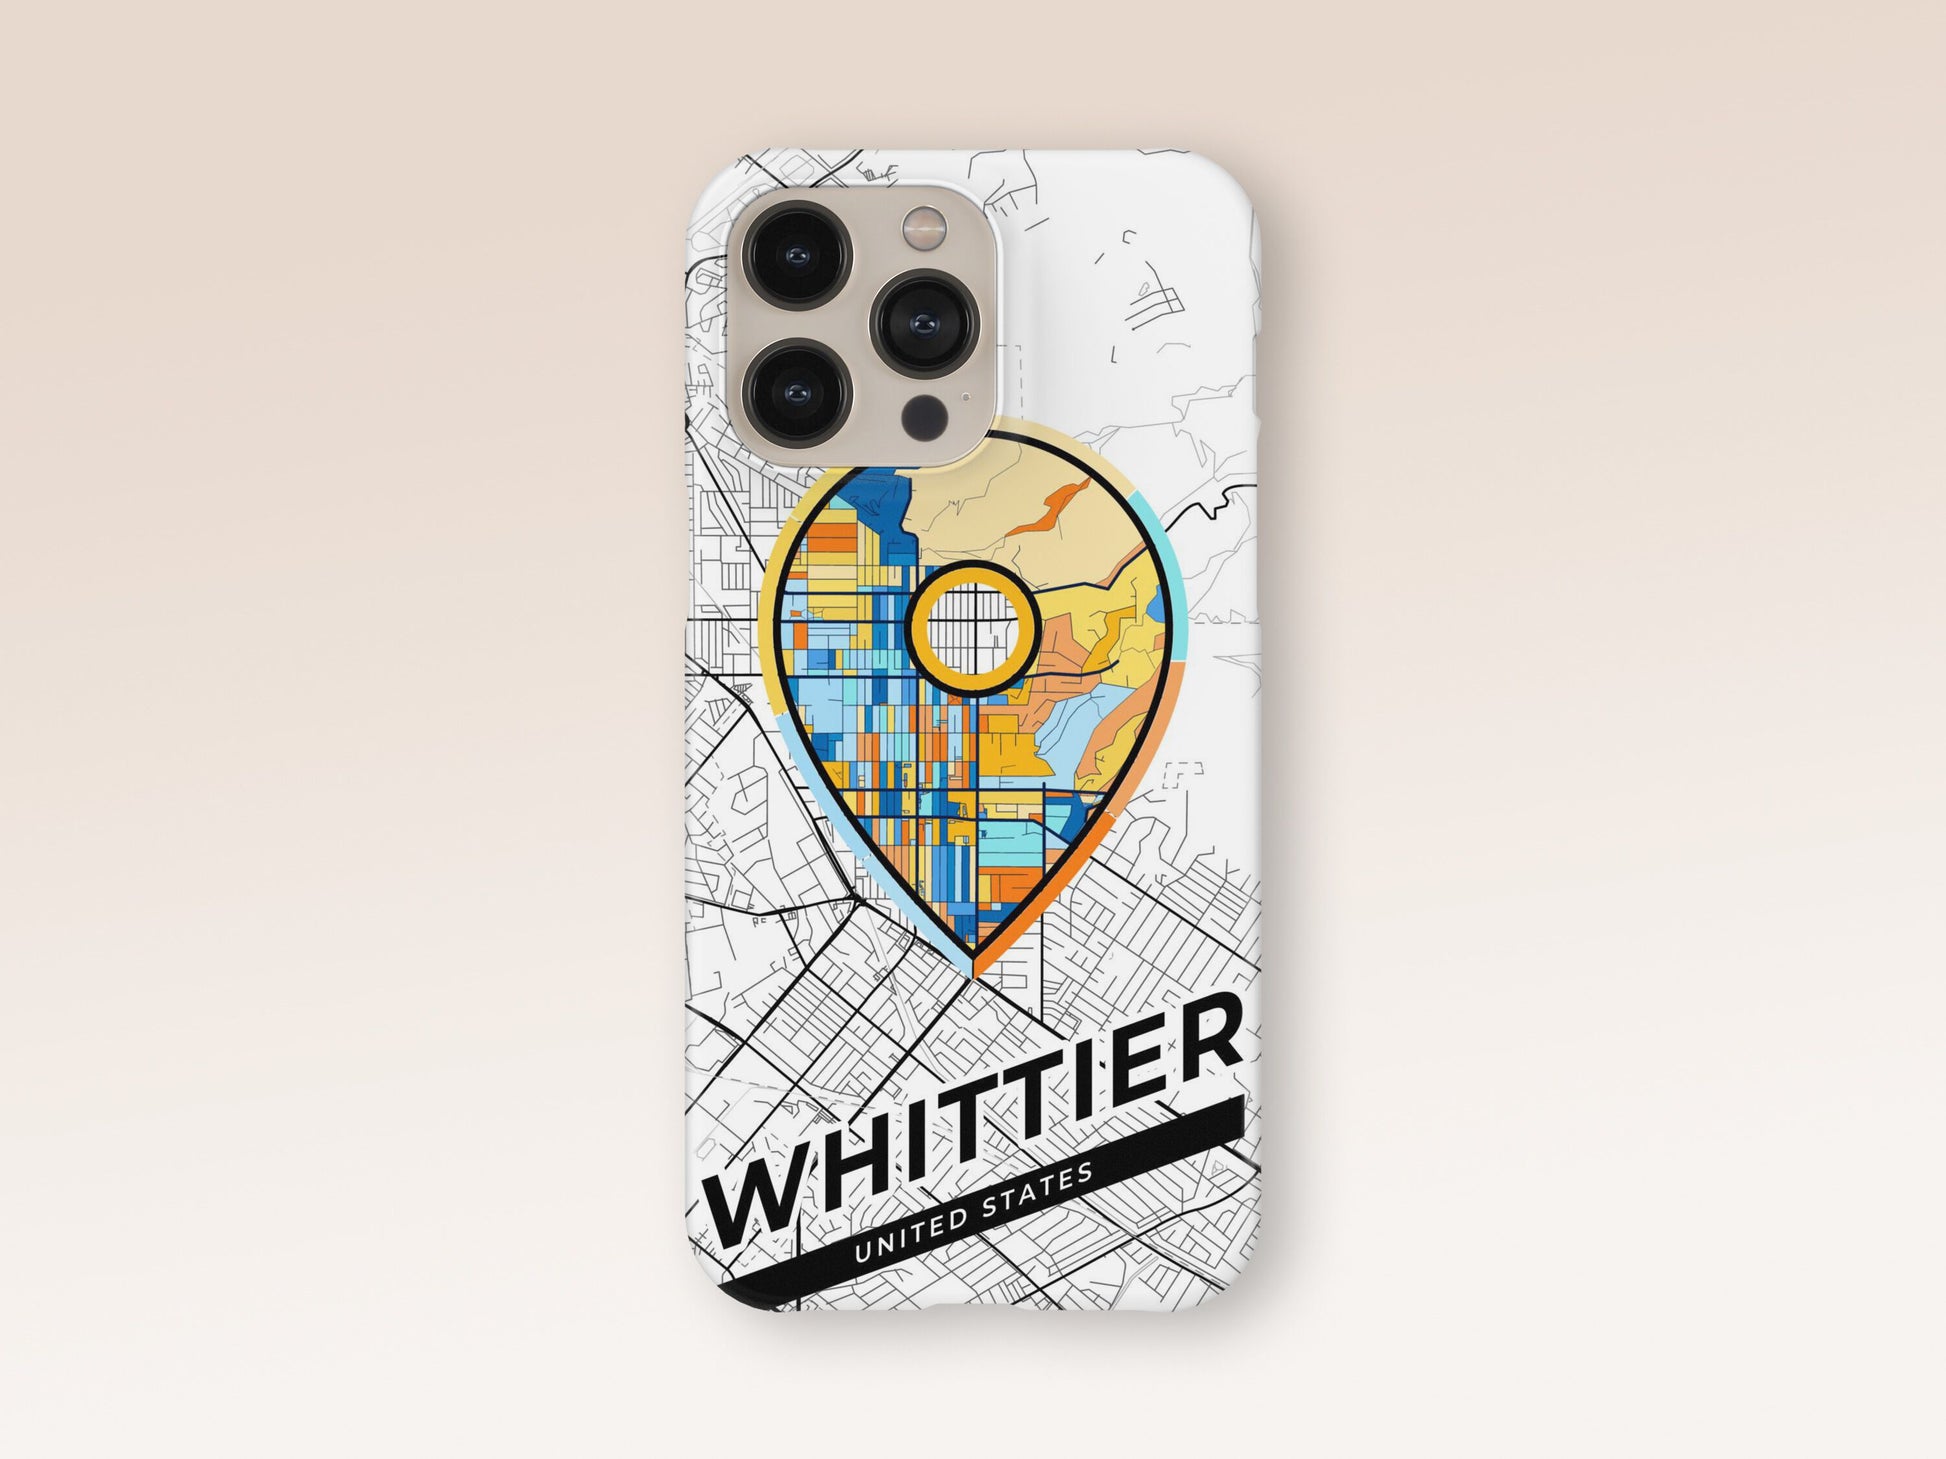 Whittier California slim phone case with colorful icon 1